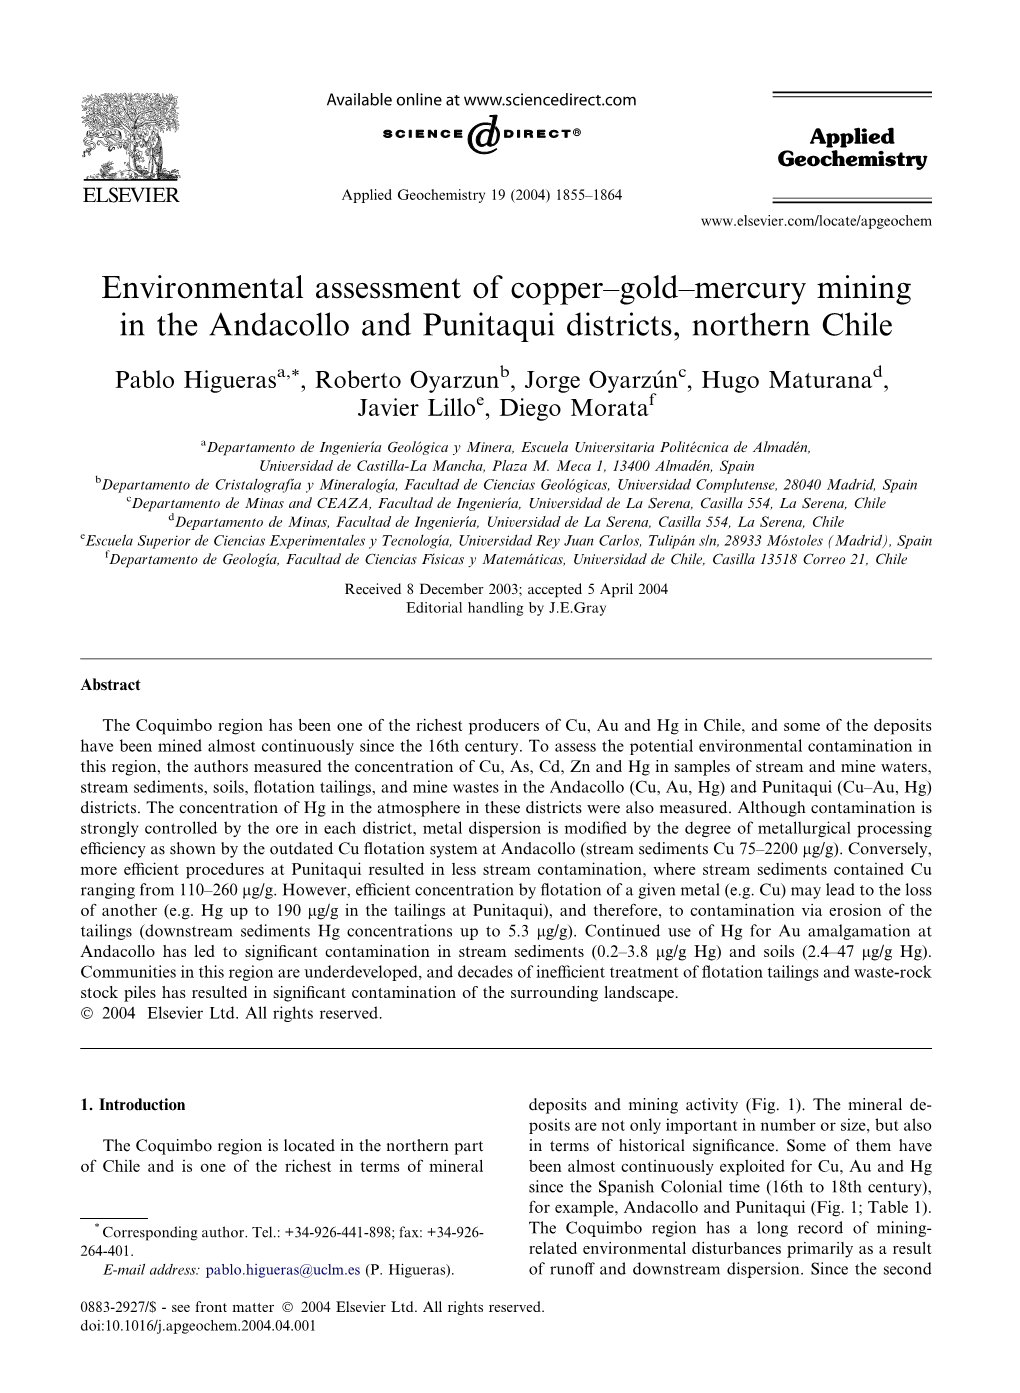 Environmental Assessment of Copper–Gold–Mercury Mining in the Andacollo and Punitaqui Districts, Northern Chile